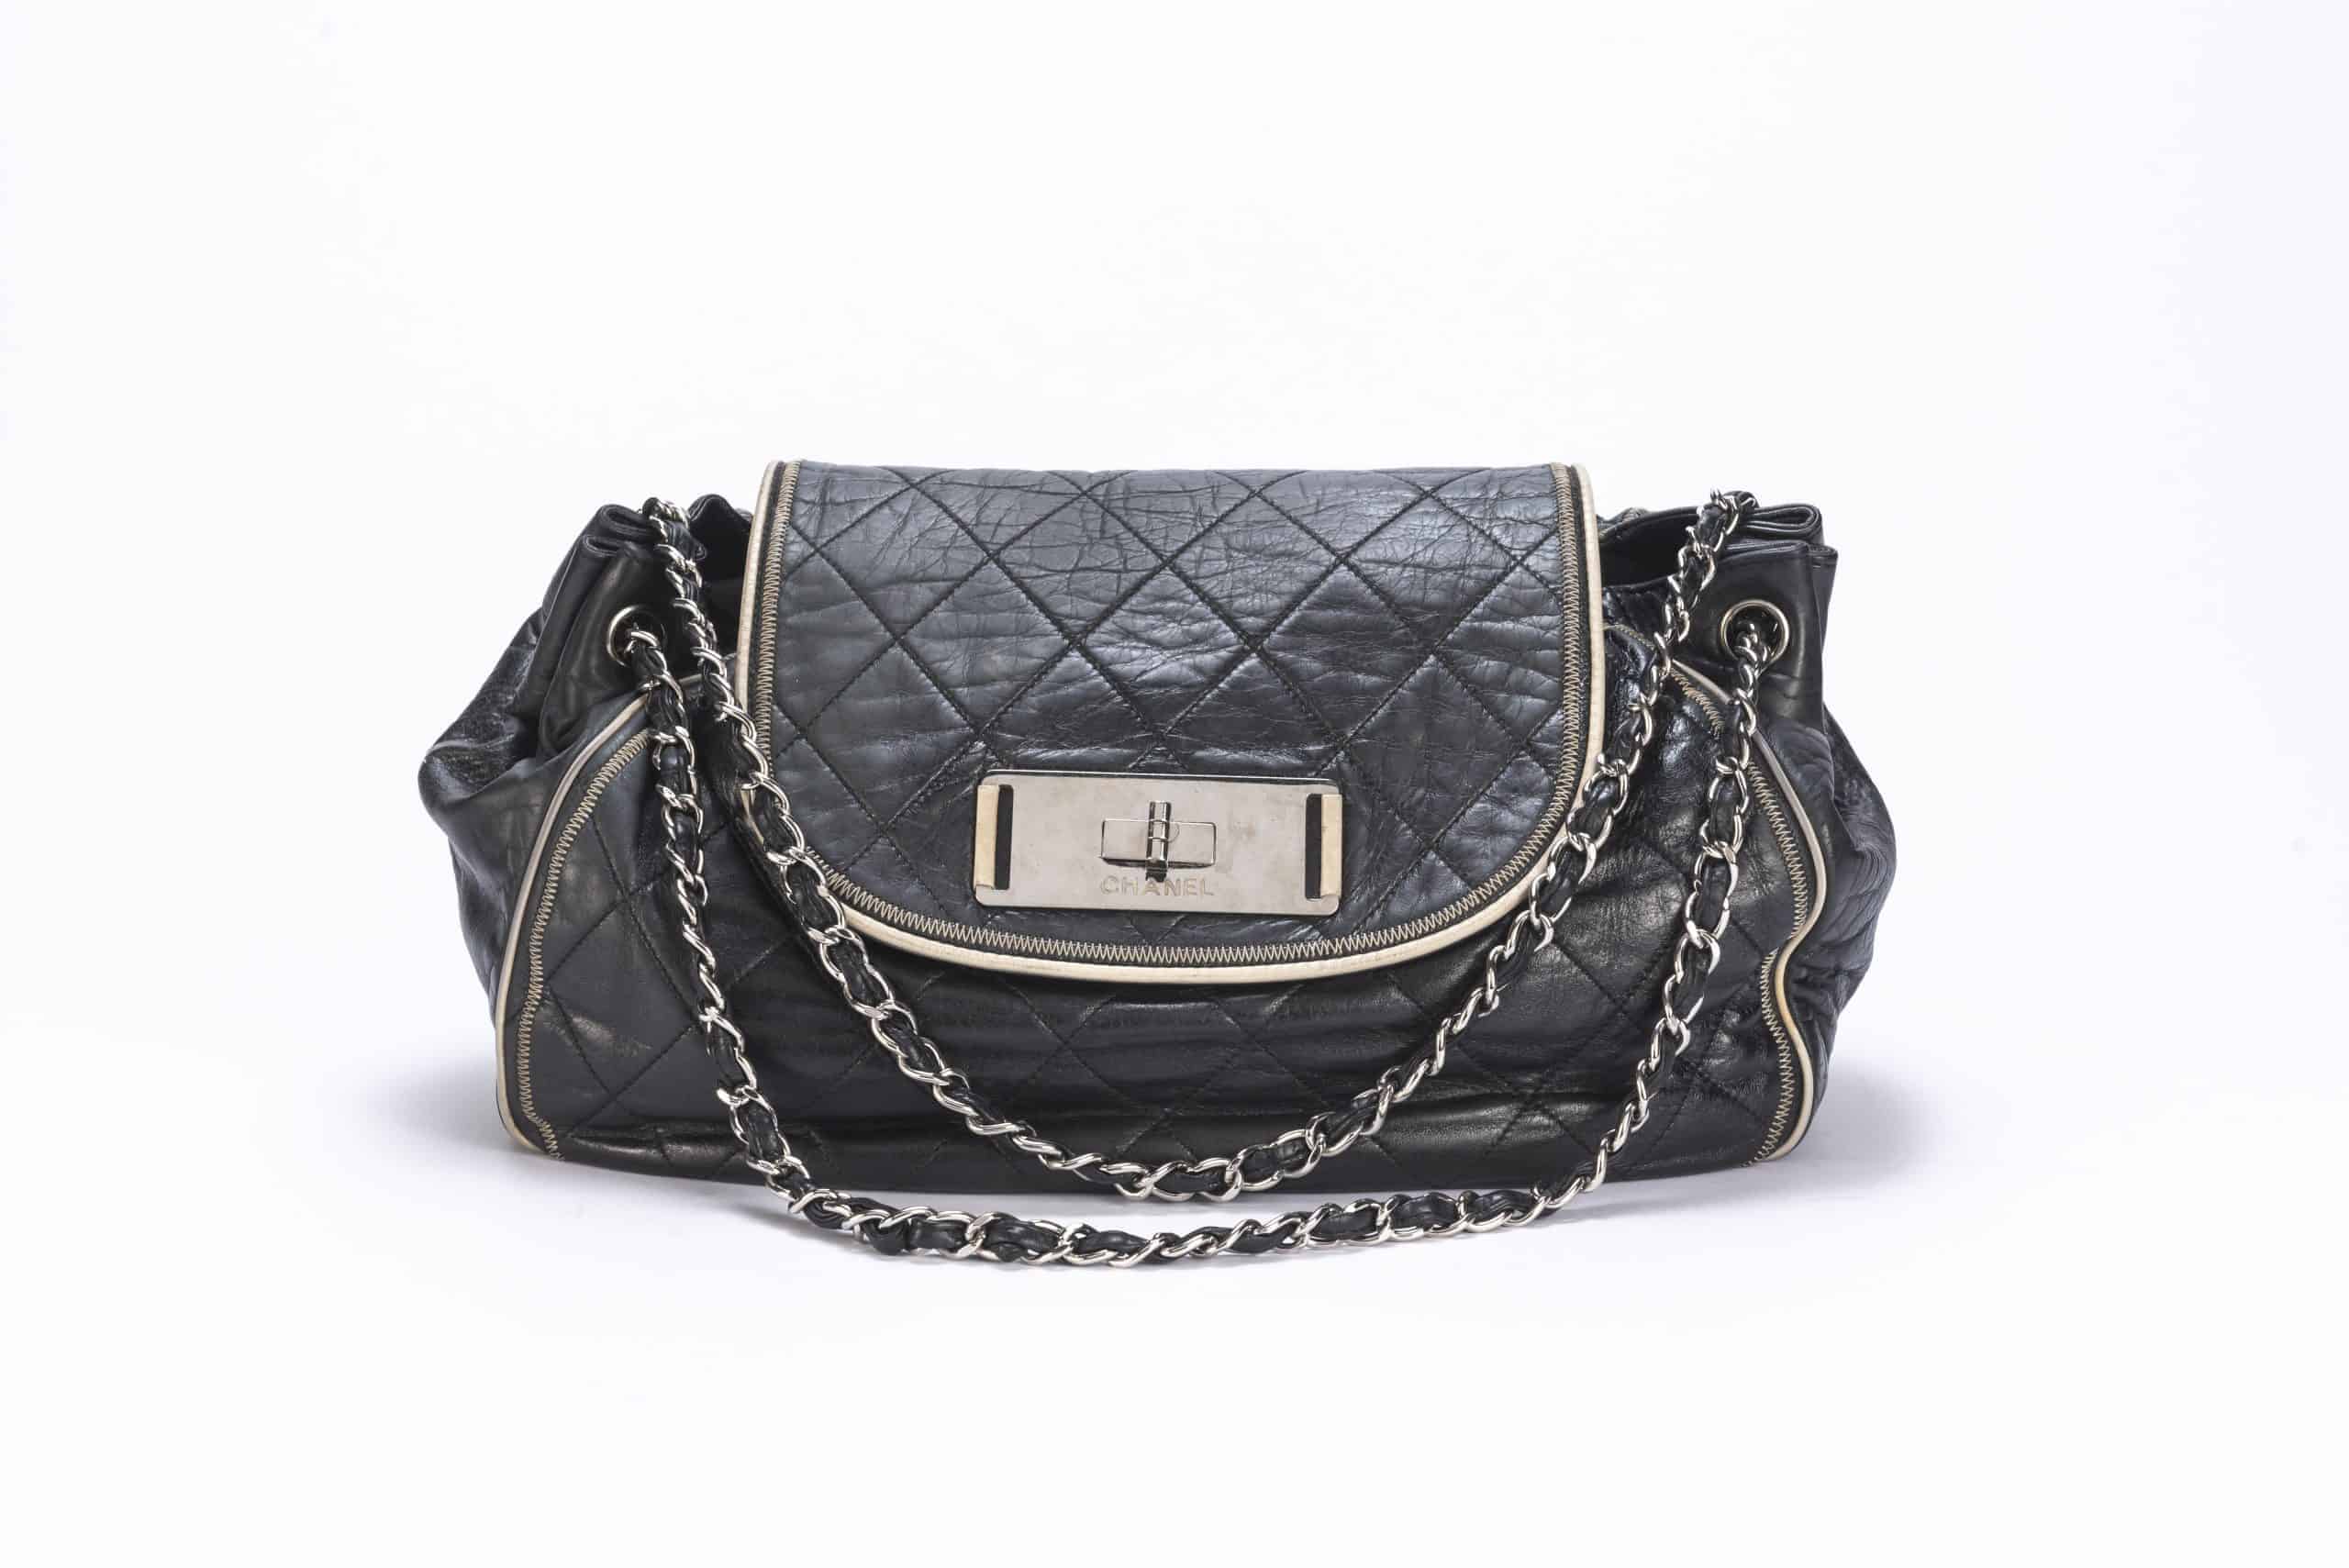 CHANEL EAST WEST MADEMOISELLE ACCORDION FLAP BAG QUILTED LAMBSKIN - 1